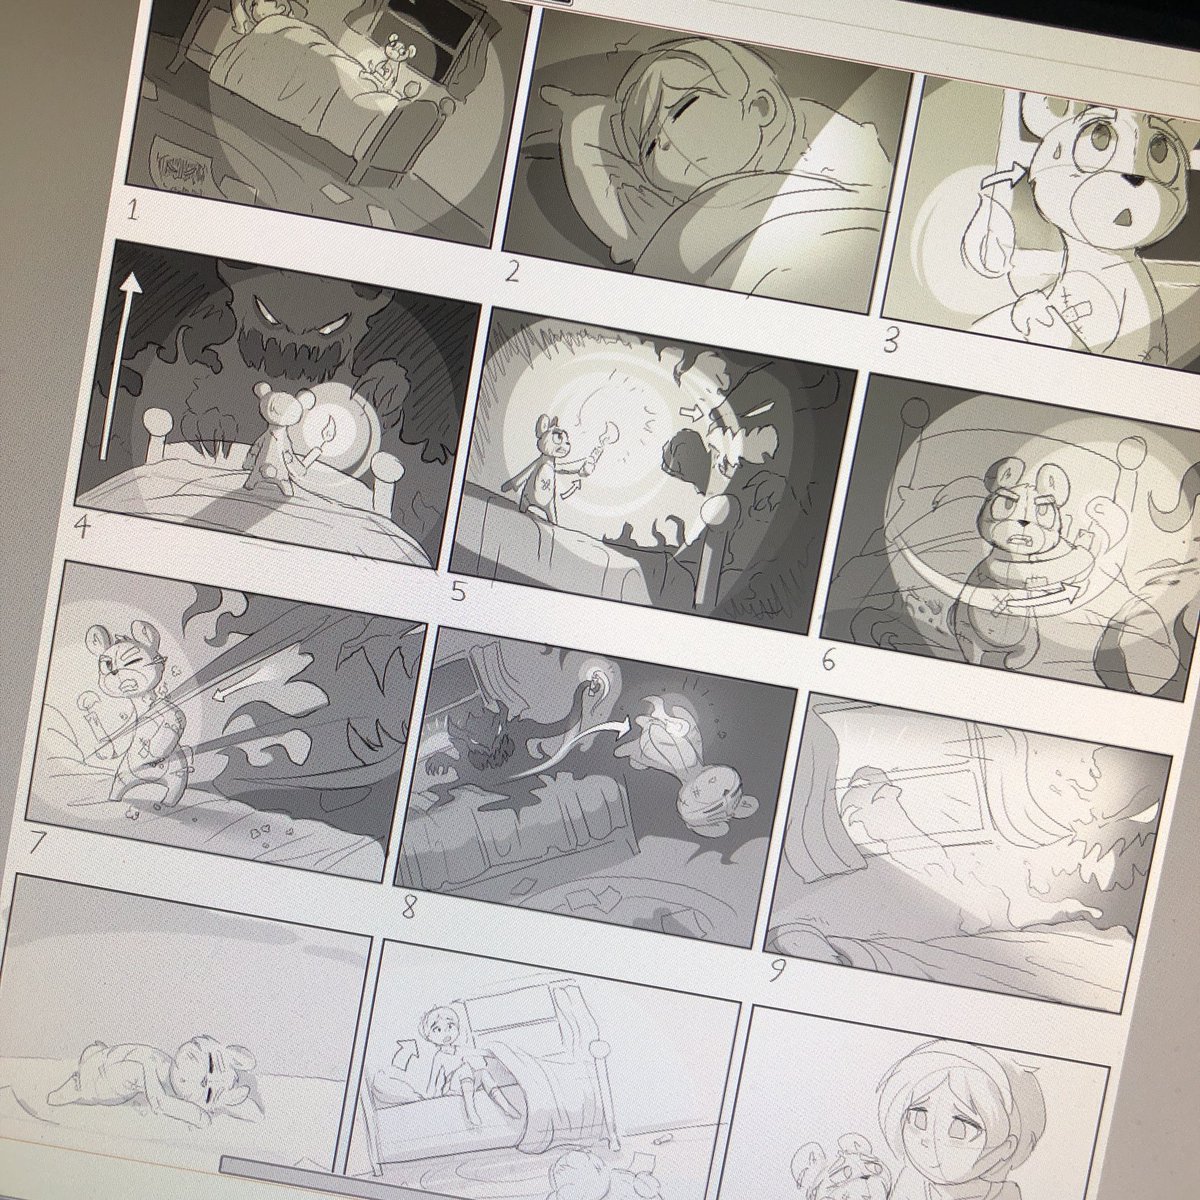 Storyboard for class!
WIP 